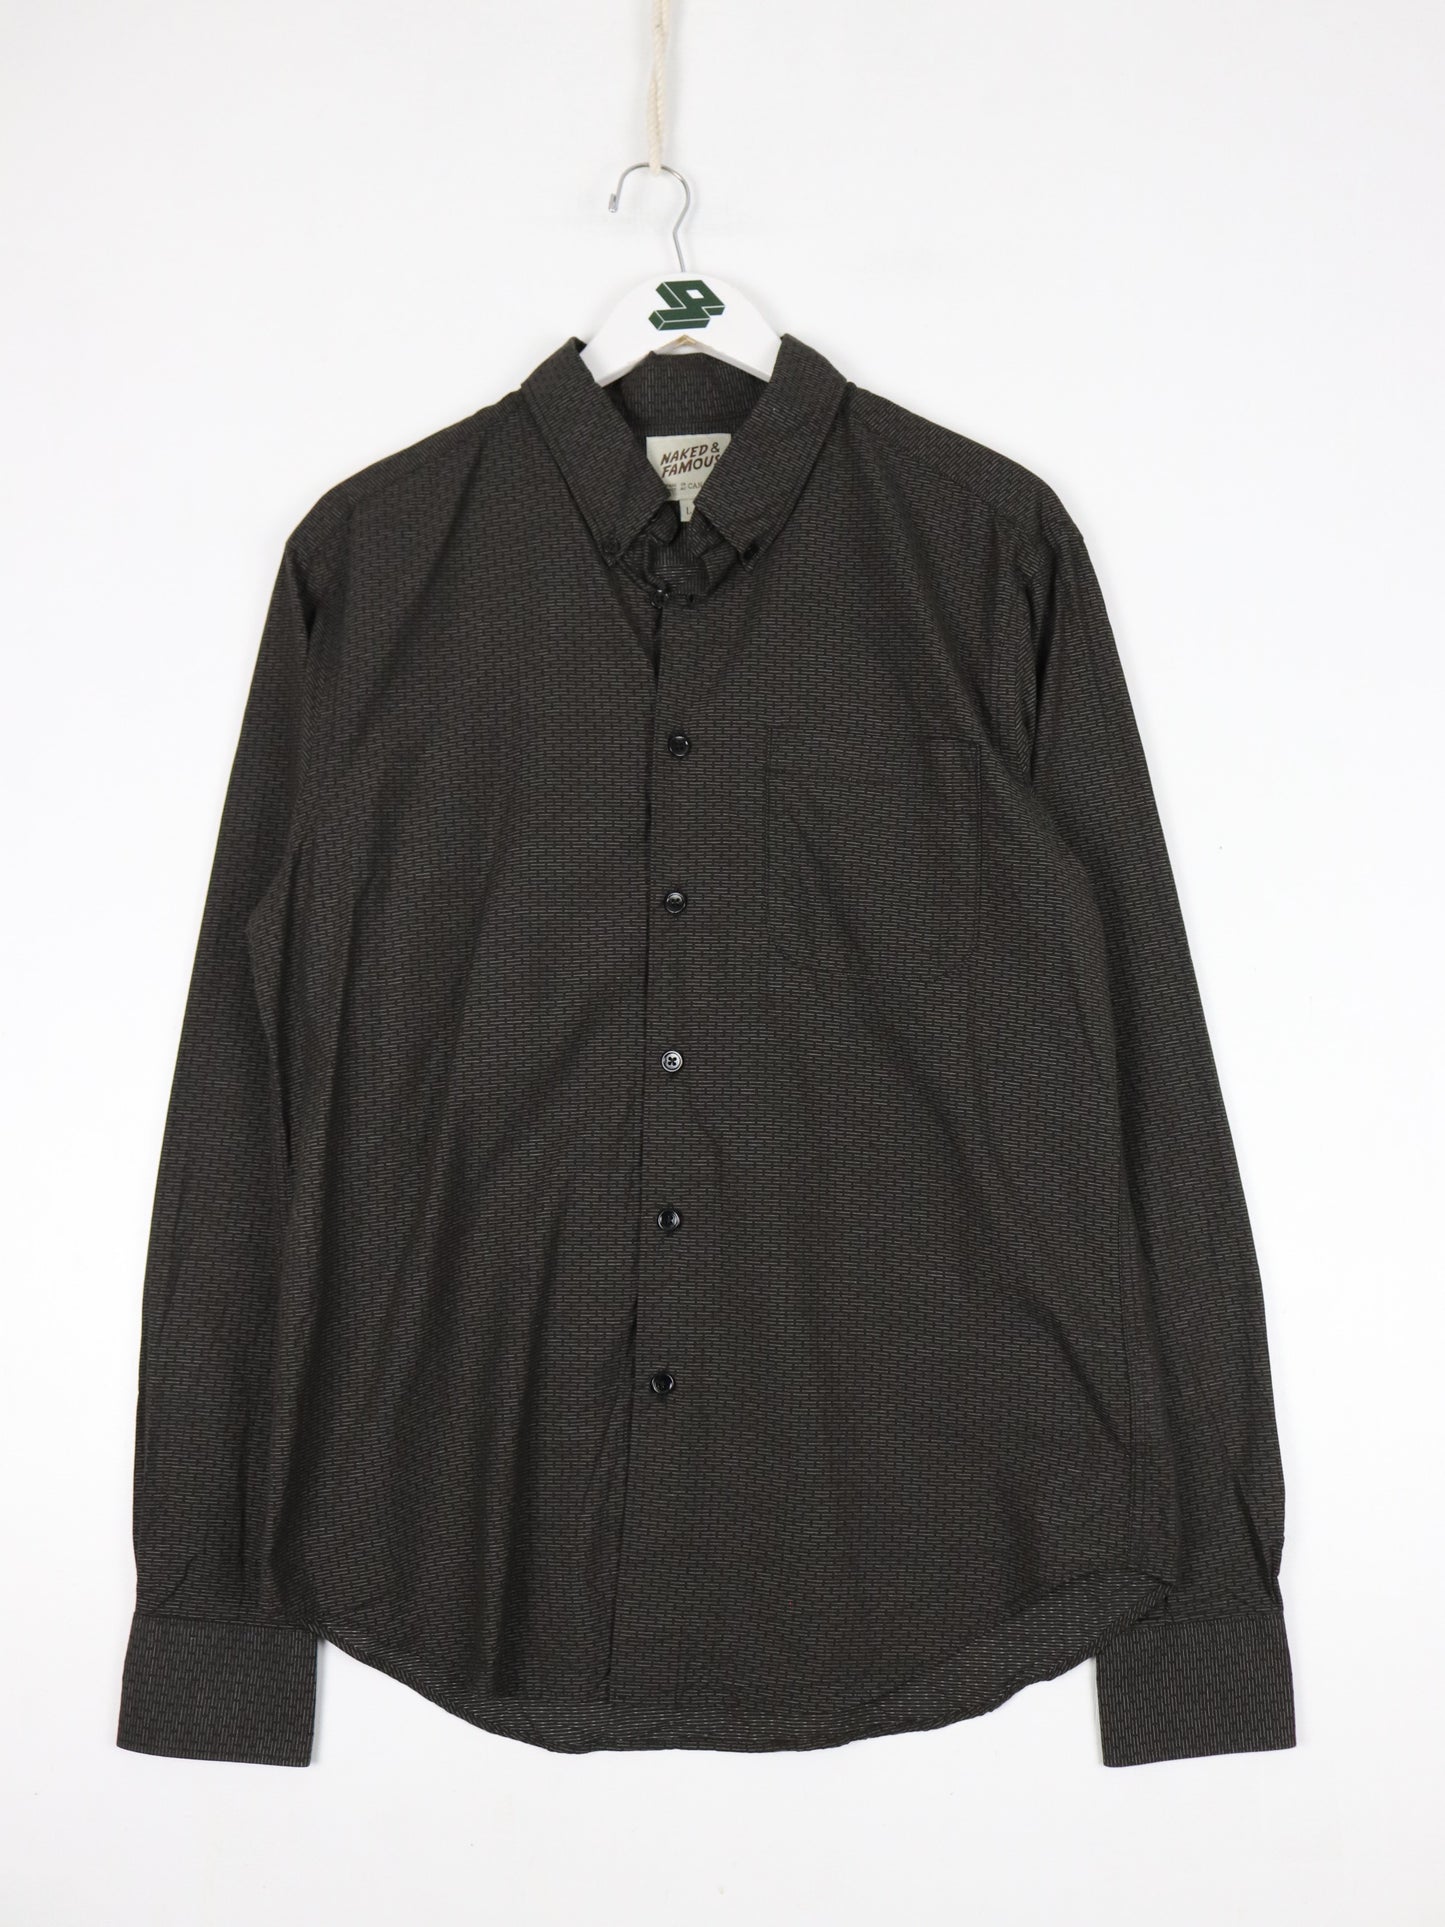 Naked & Famous Shirt Mens Large Brown Button Up